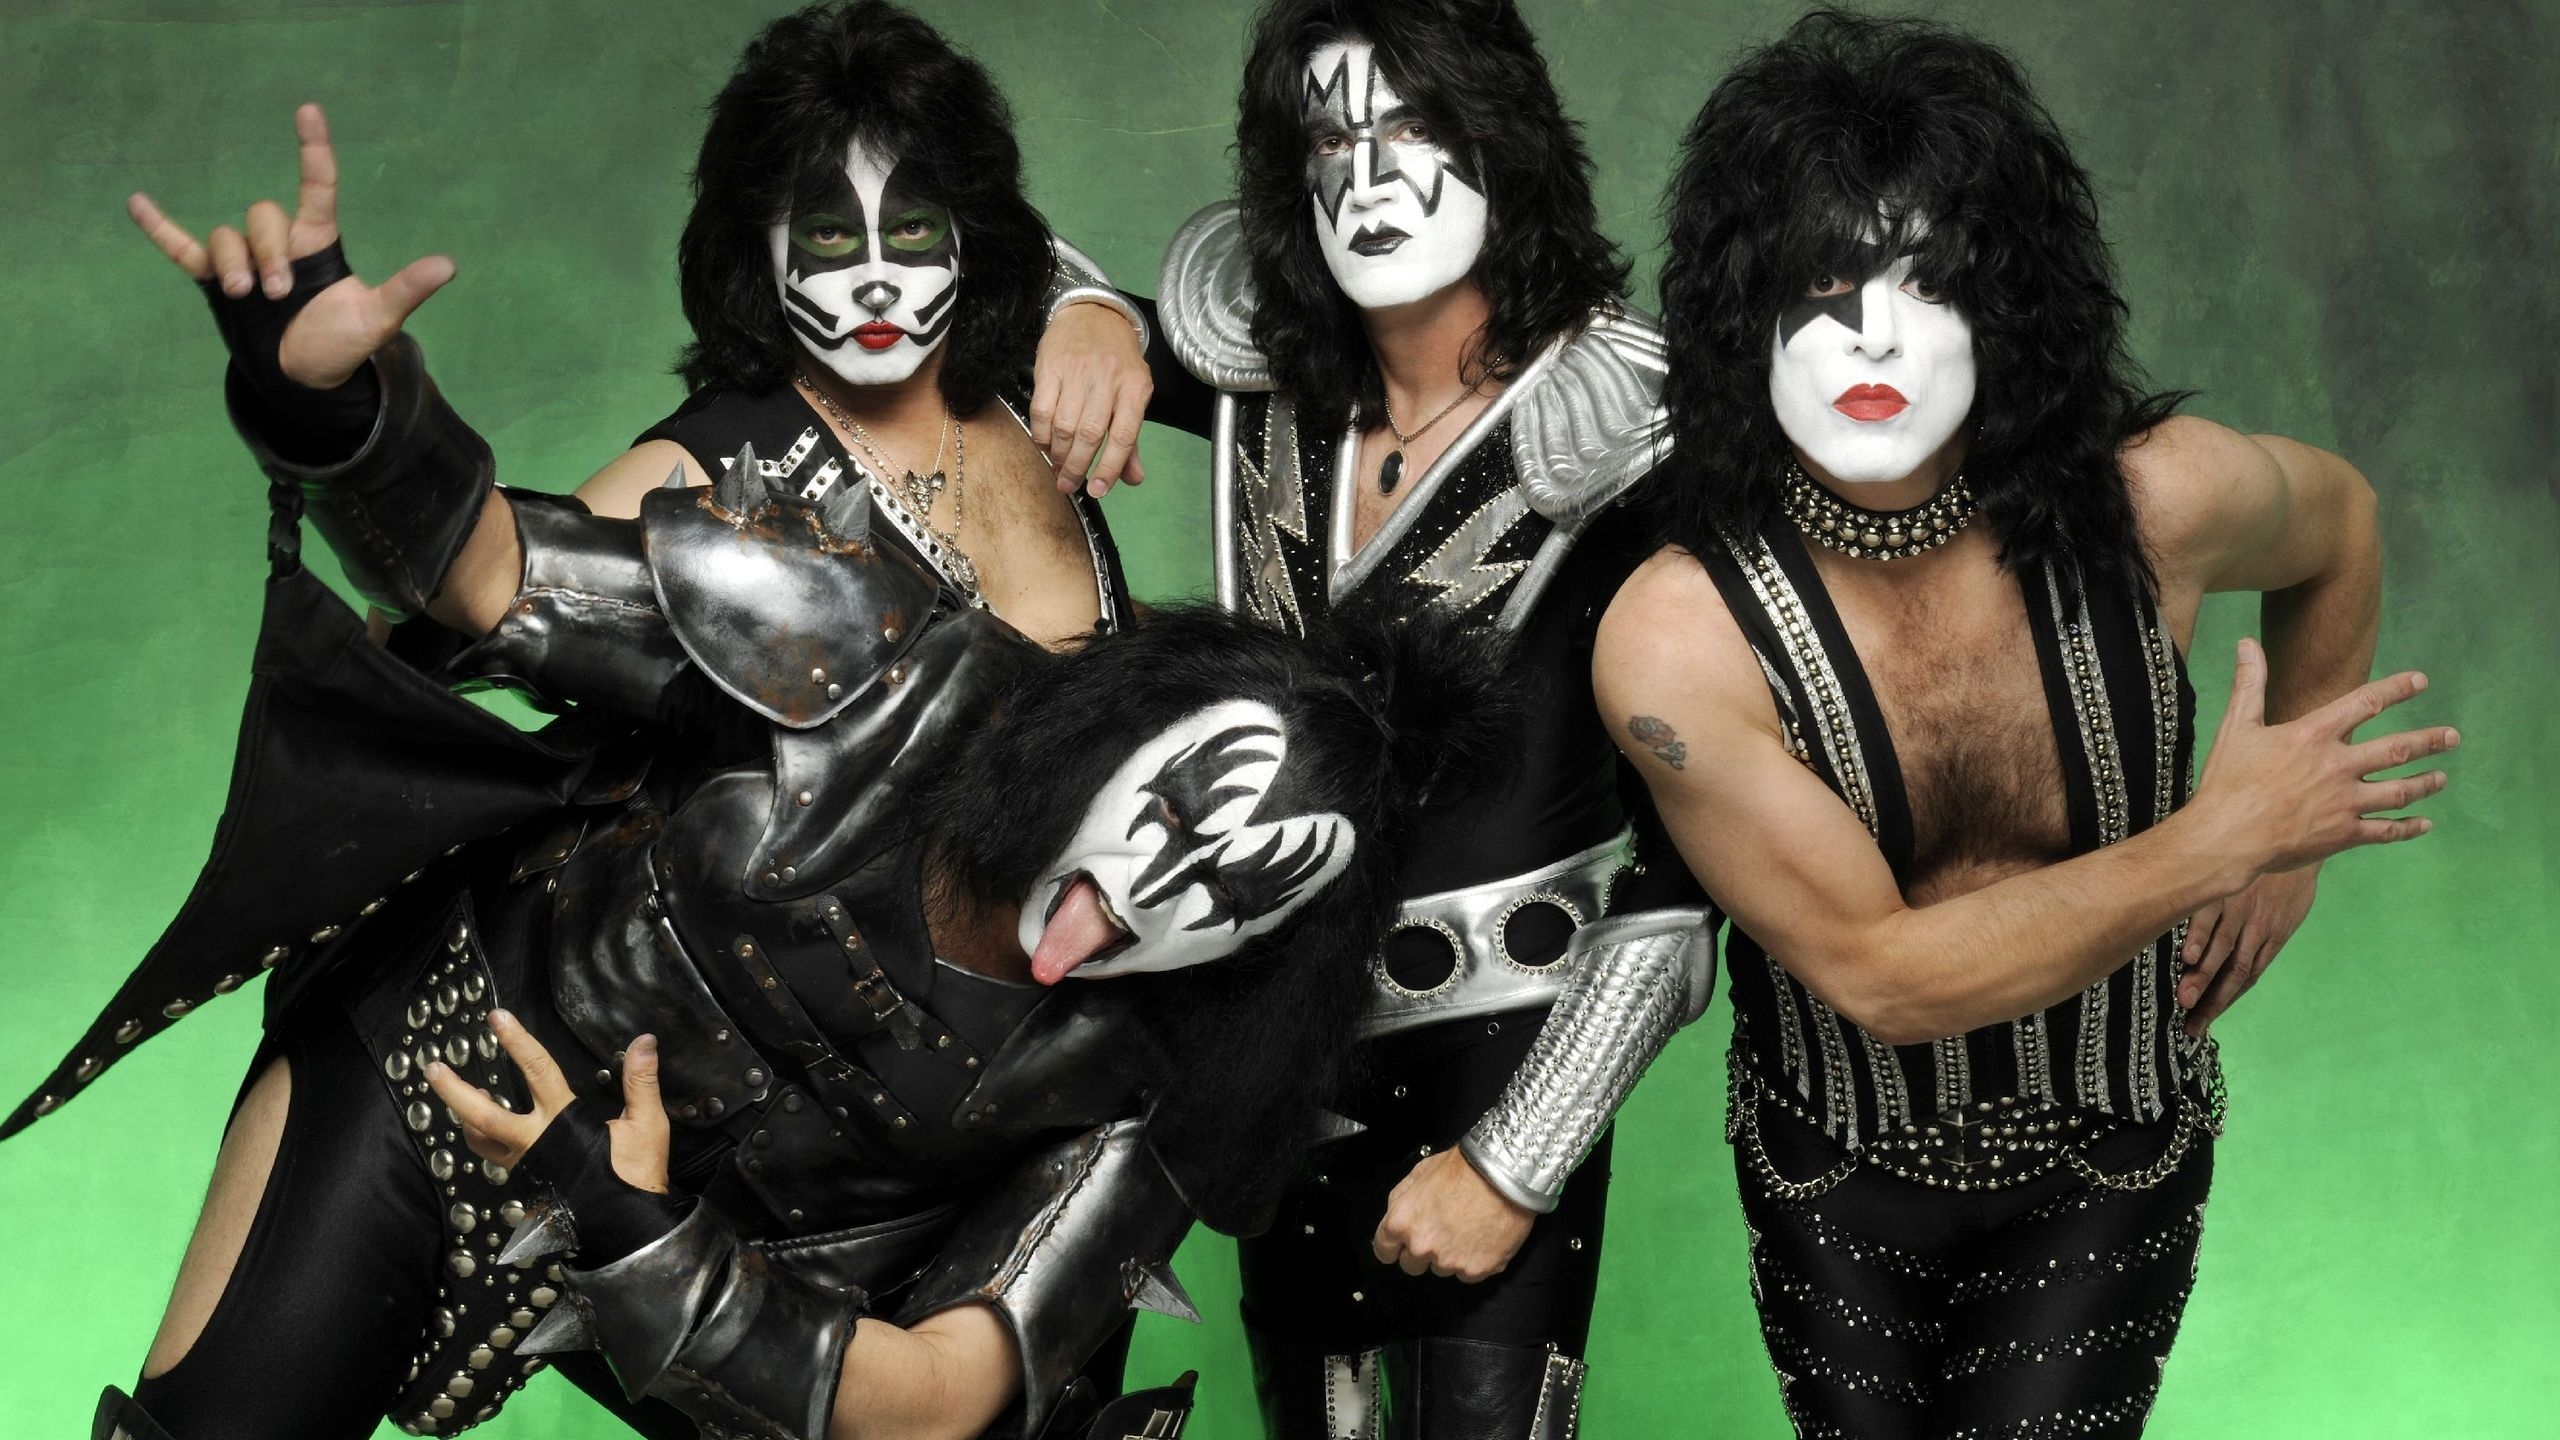 Kiss The Rock for 2560x1440 HDTV resolution